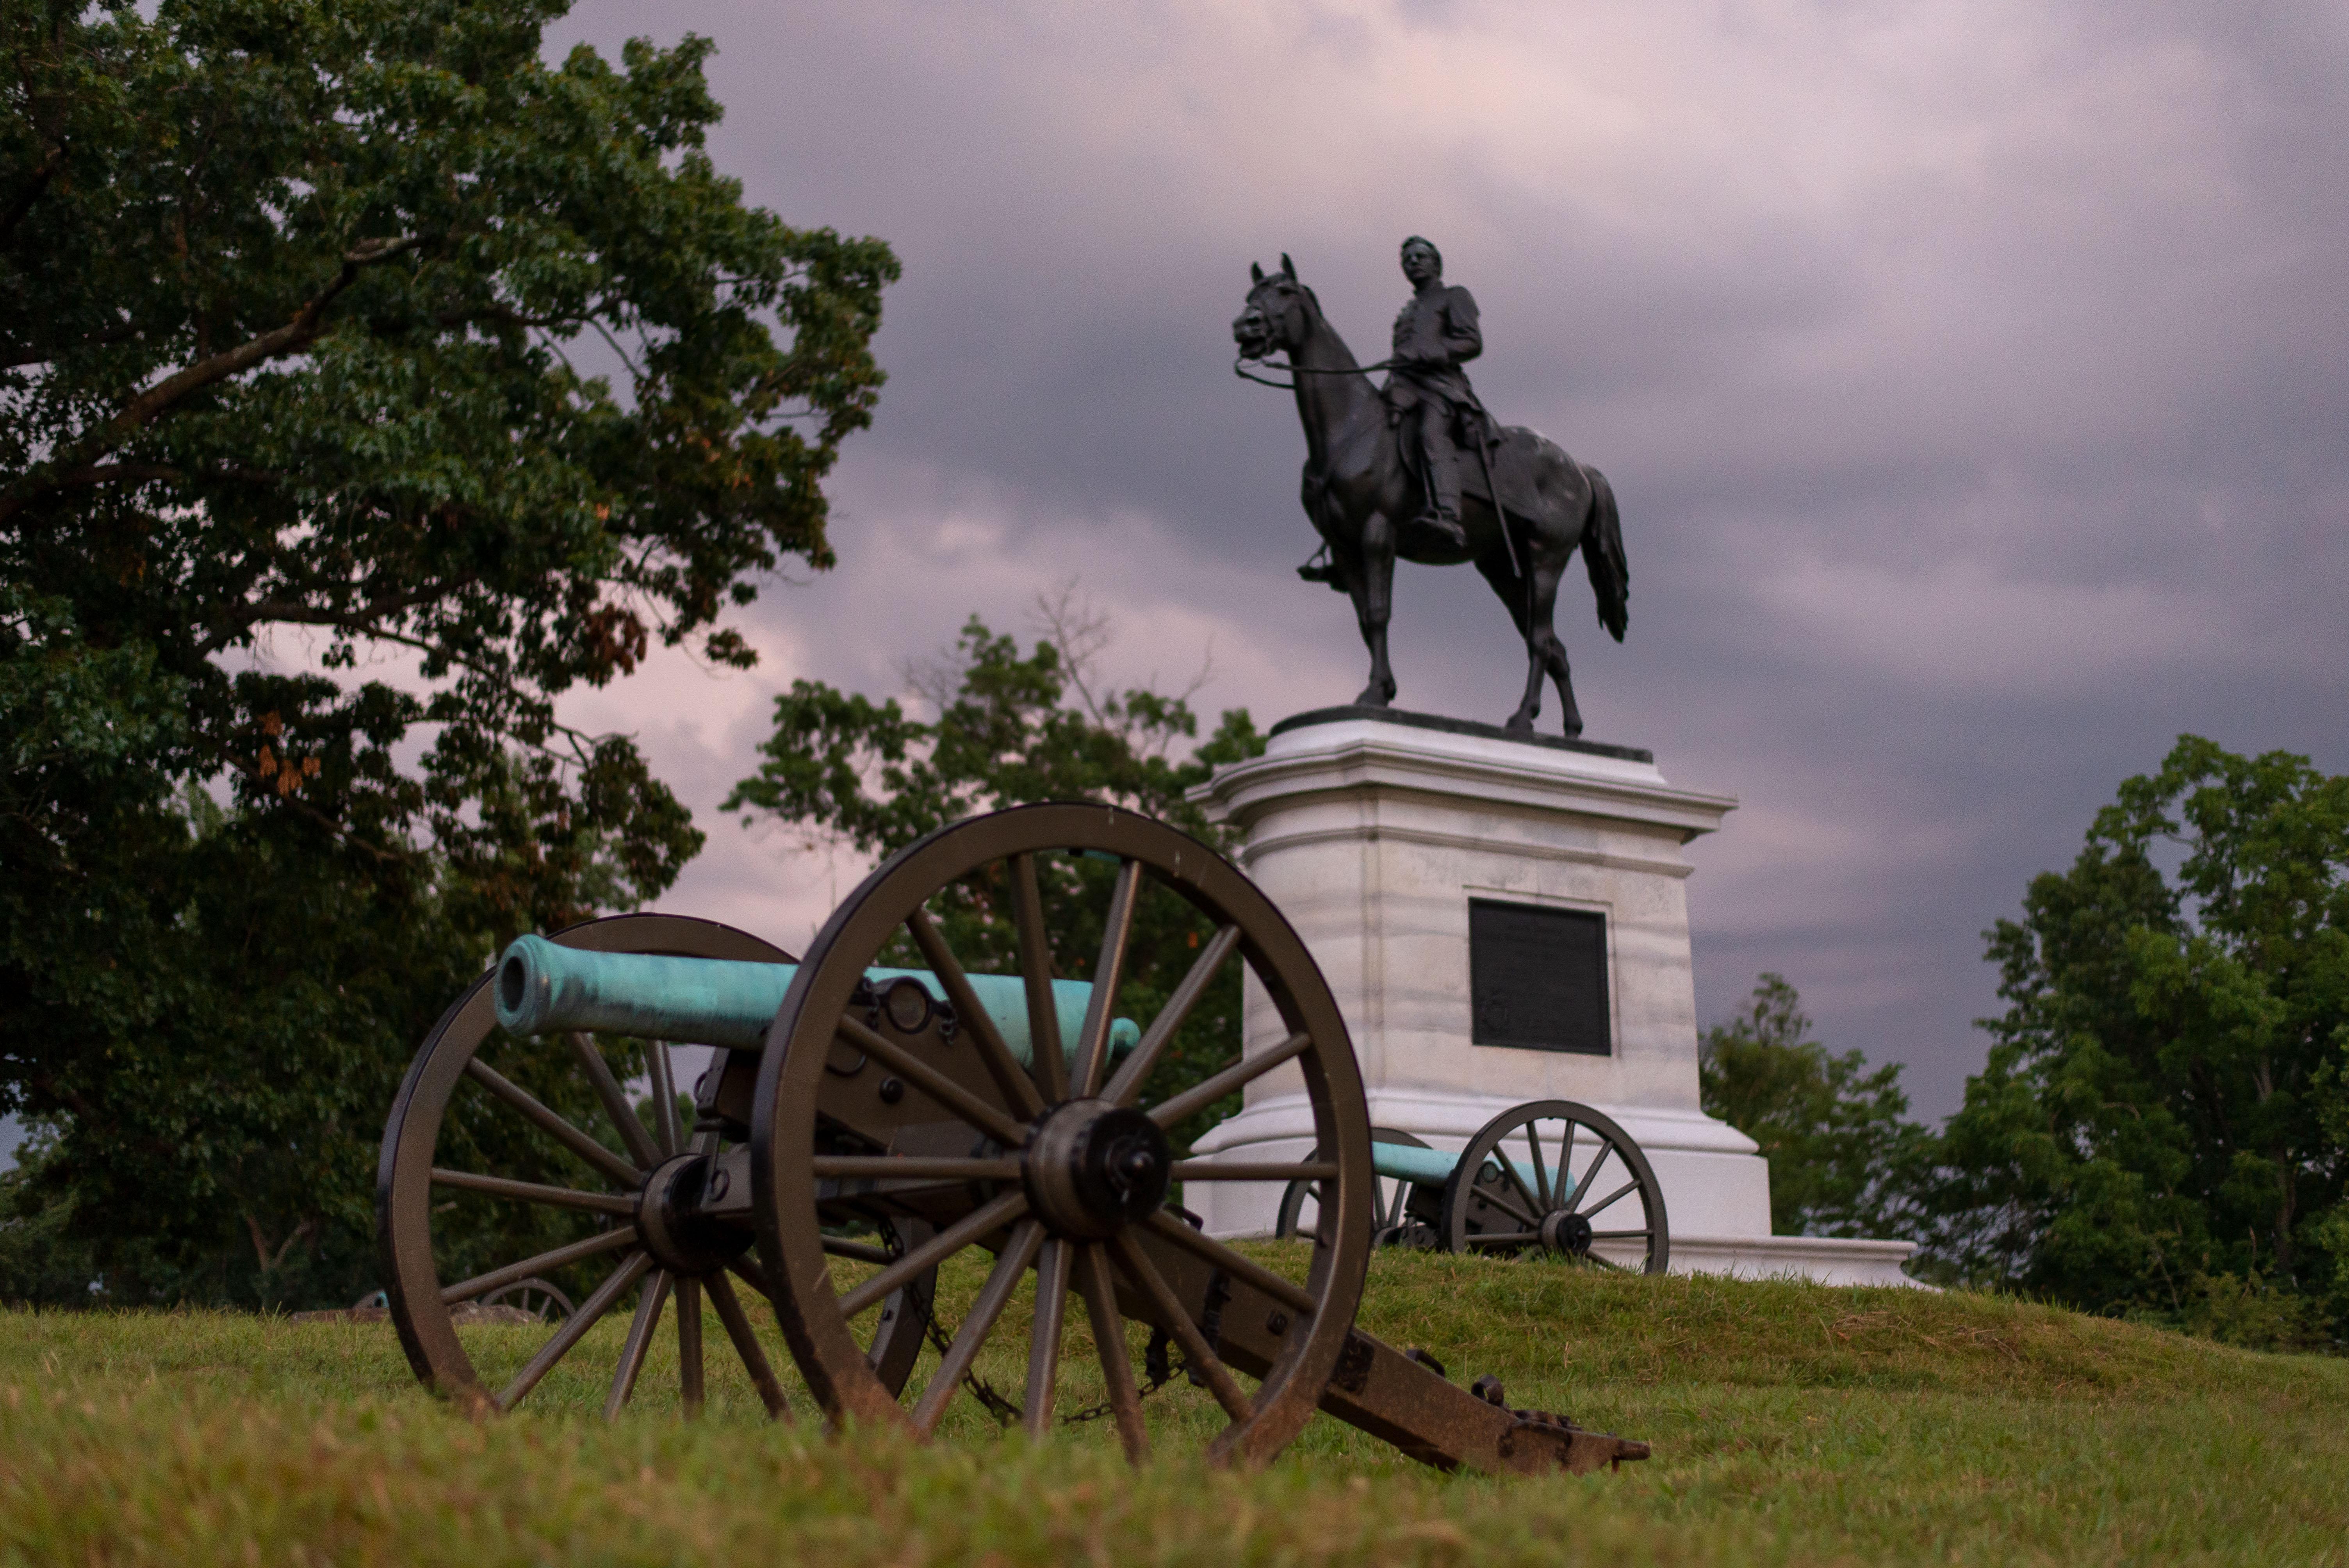 A canon sits in front of an equestrian statue.